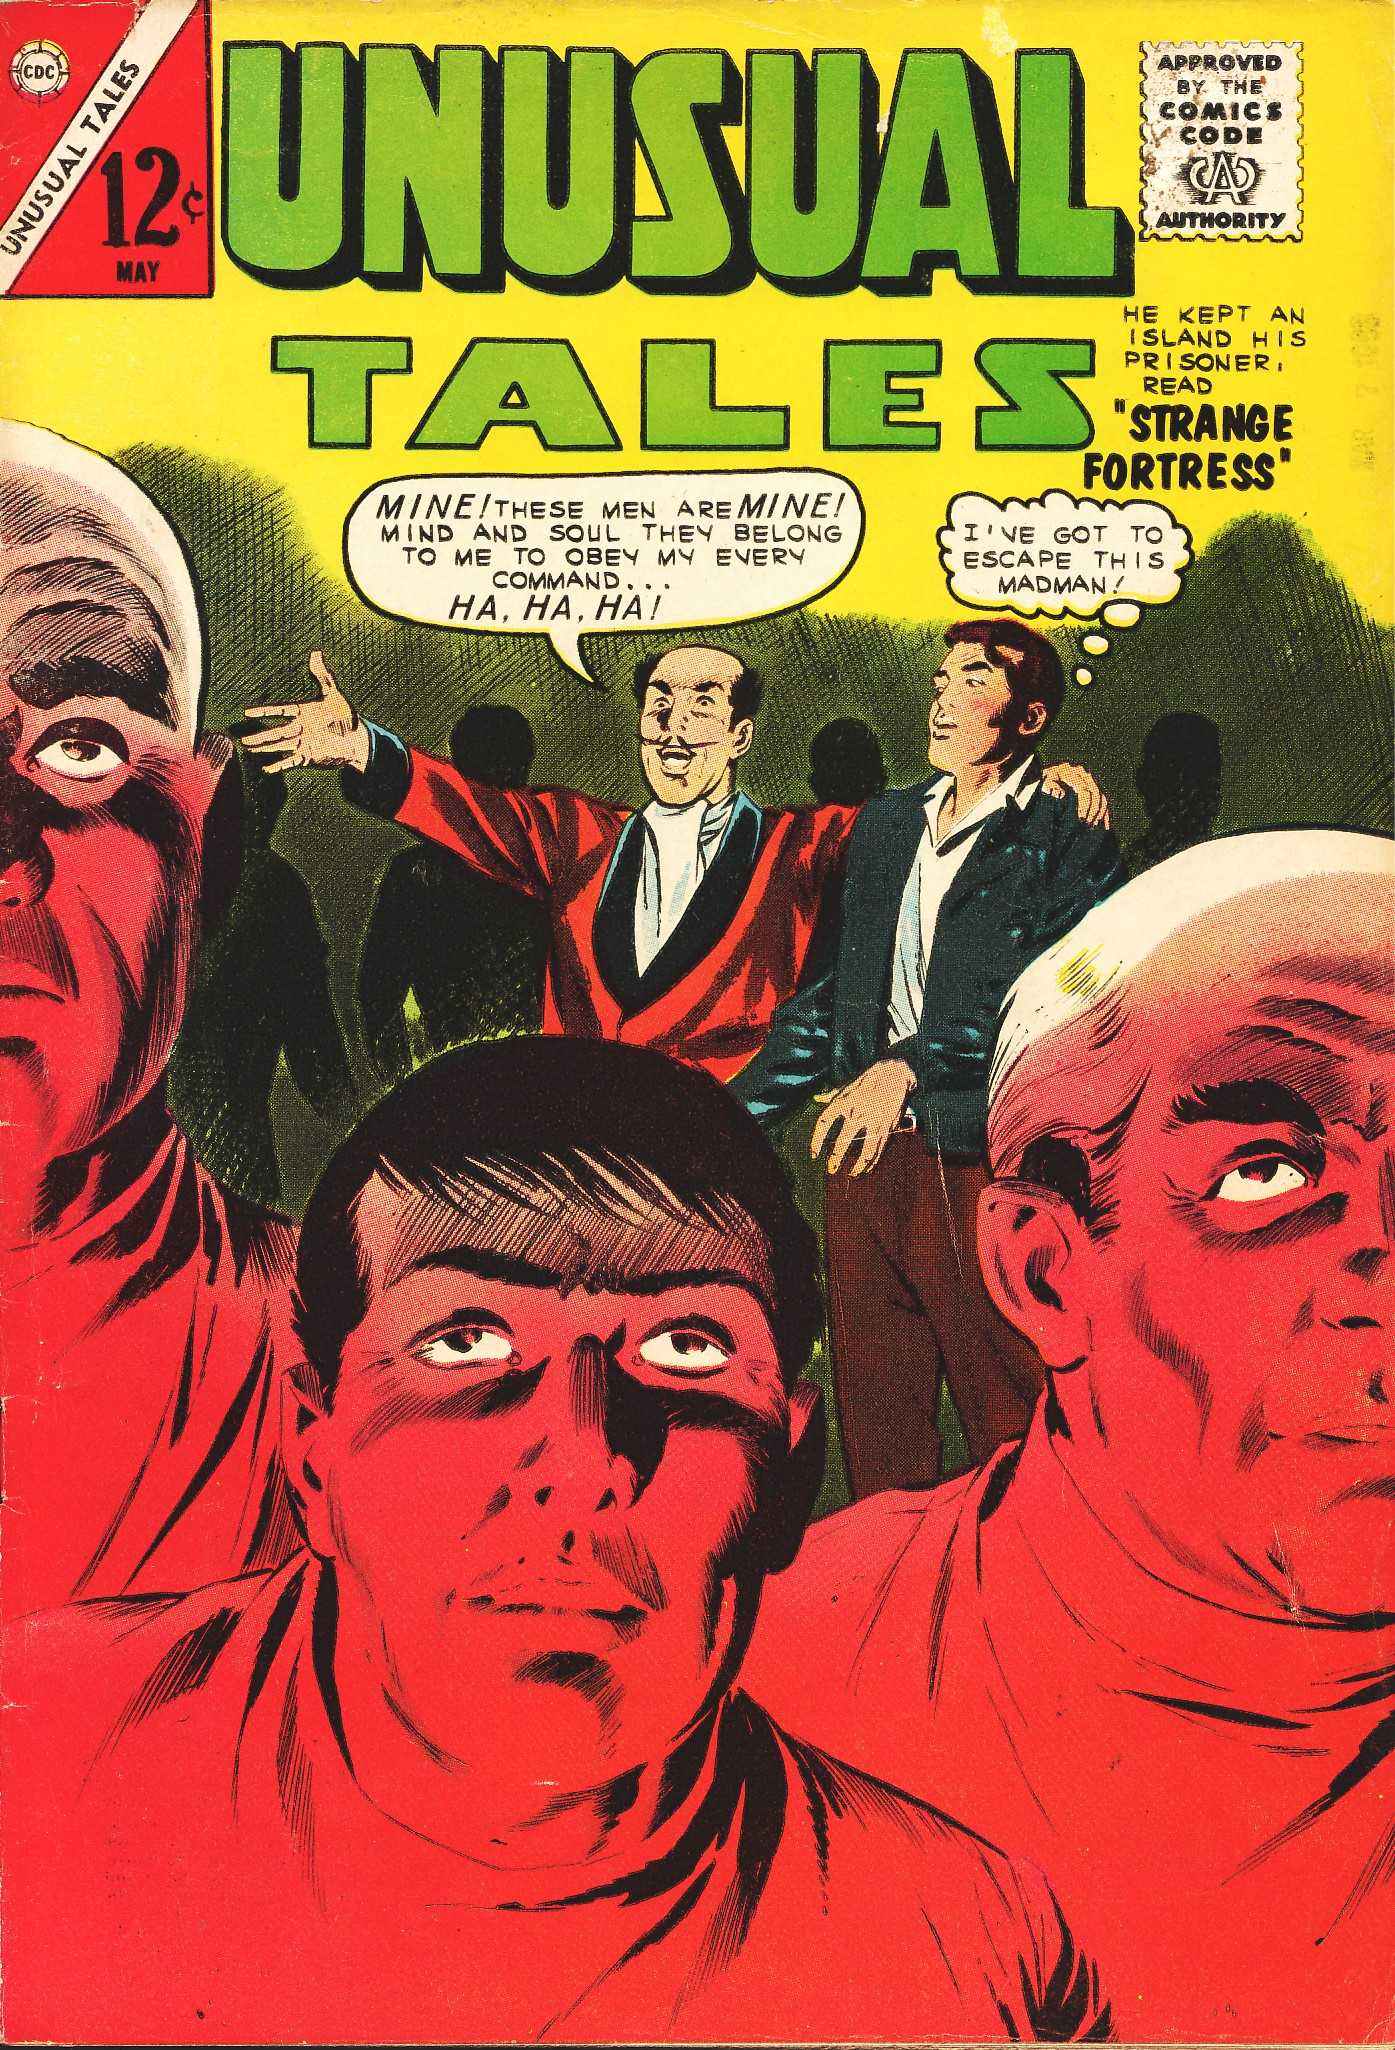 Read online Unusual Tales comic -  Issue #39 - 1